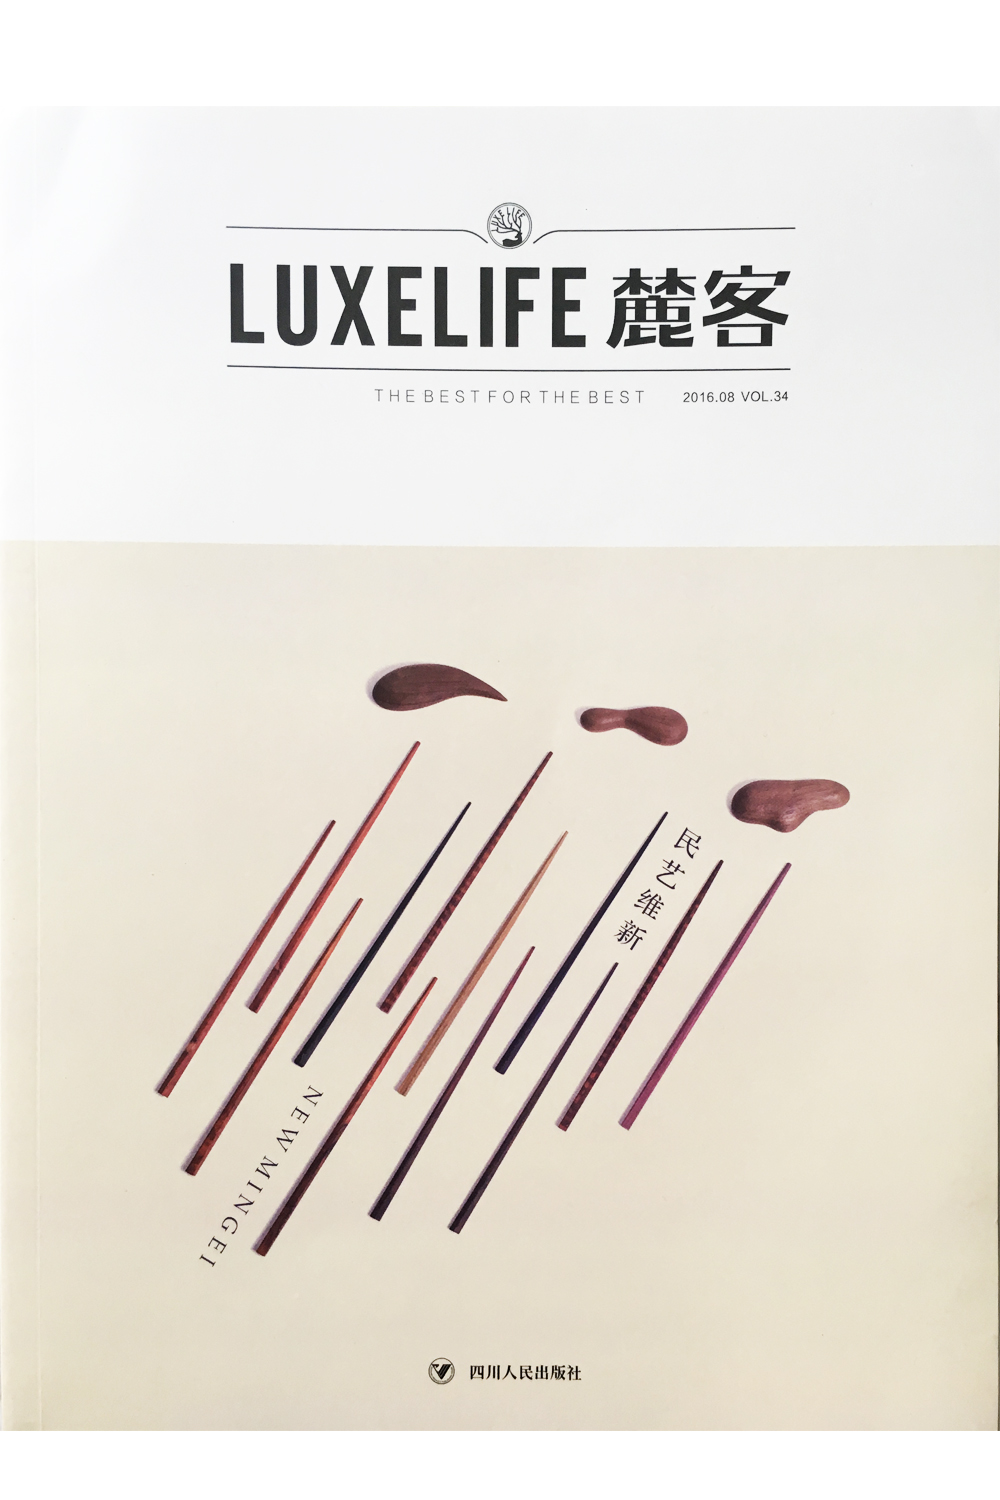 Luxelife, Linehouse profile, August 2016